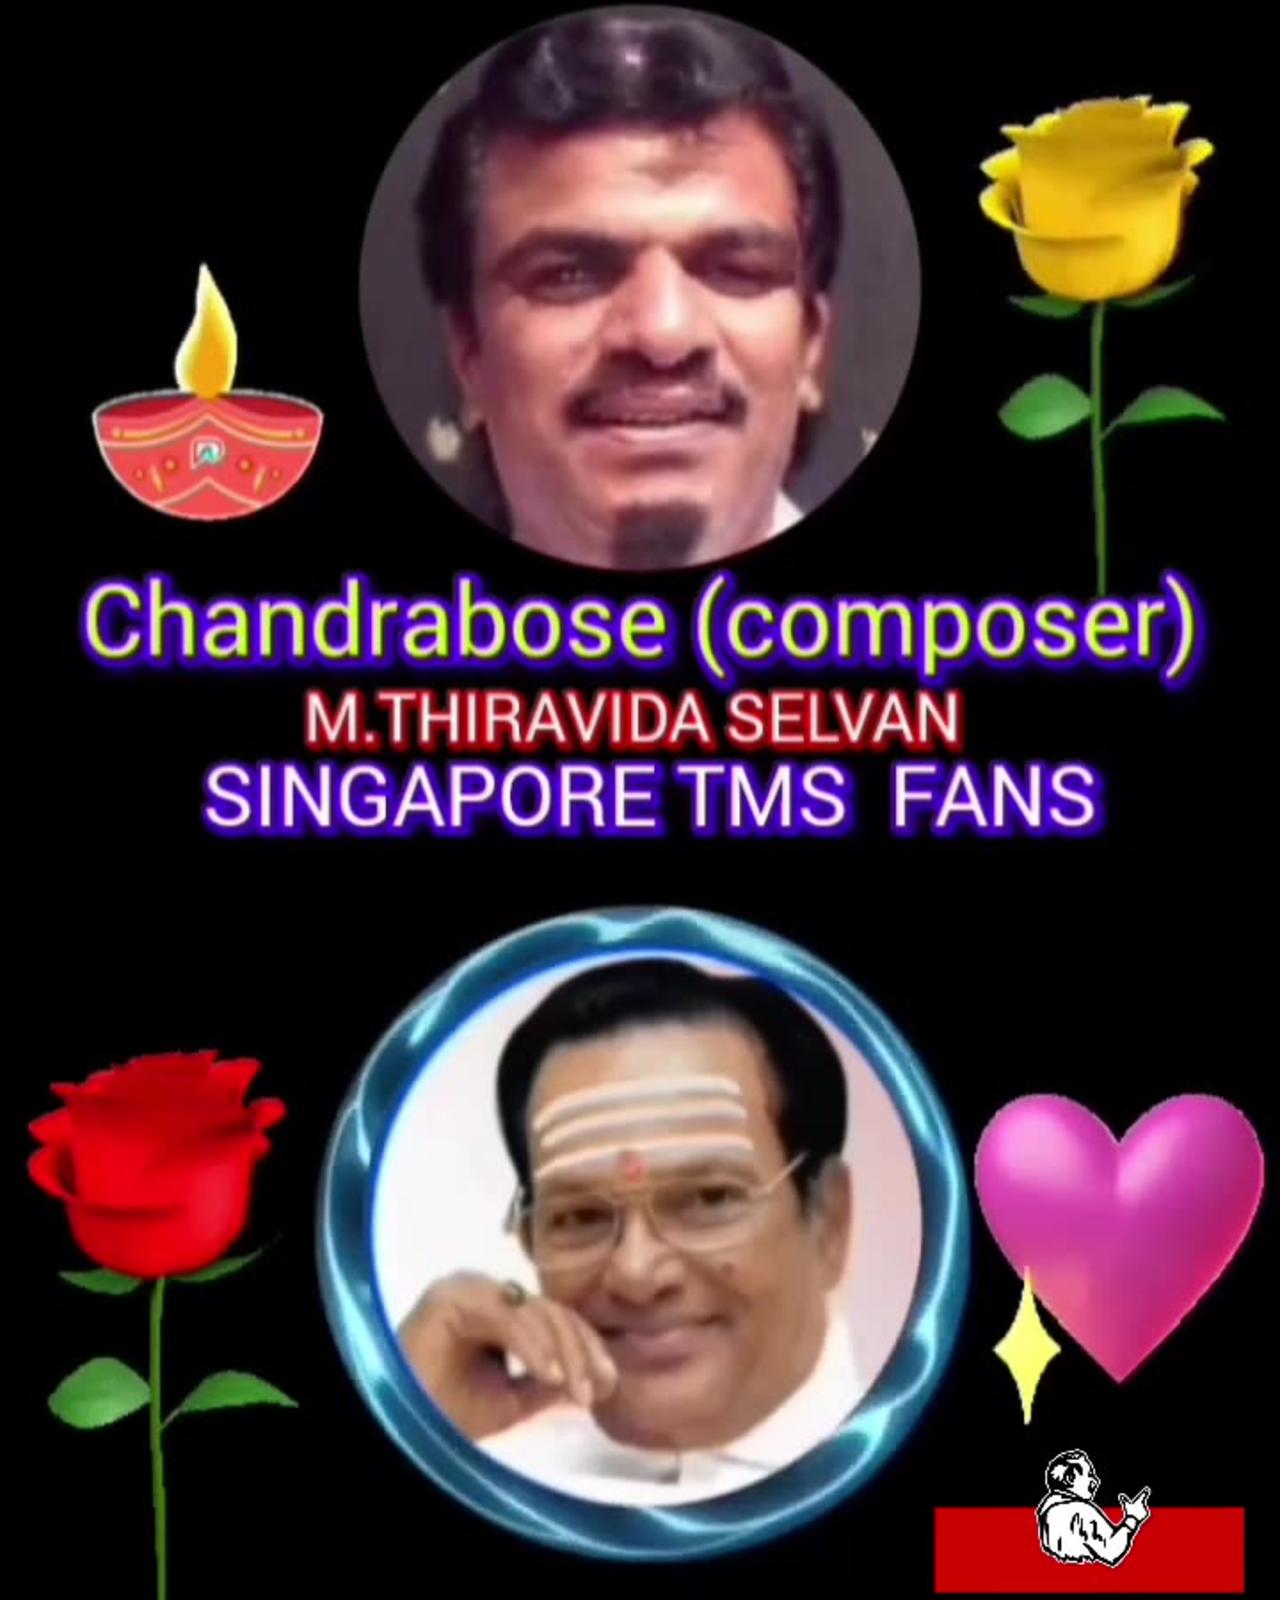 chandrabose music director THANKS FROM SINGAPORE TMSFANS M.THIRAVIDASELVAN   SONG 2. மாங்குடி மைனர்